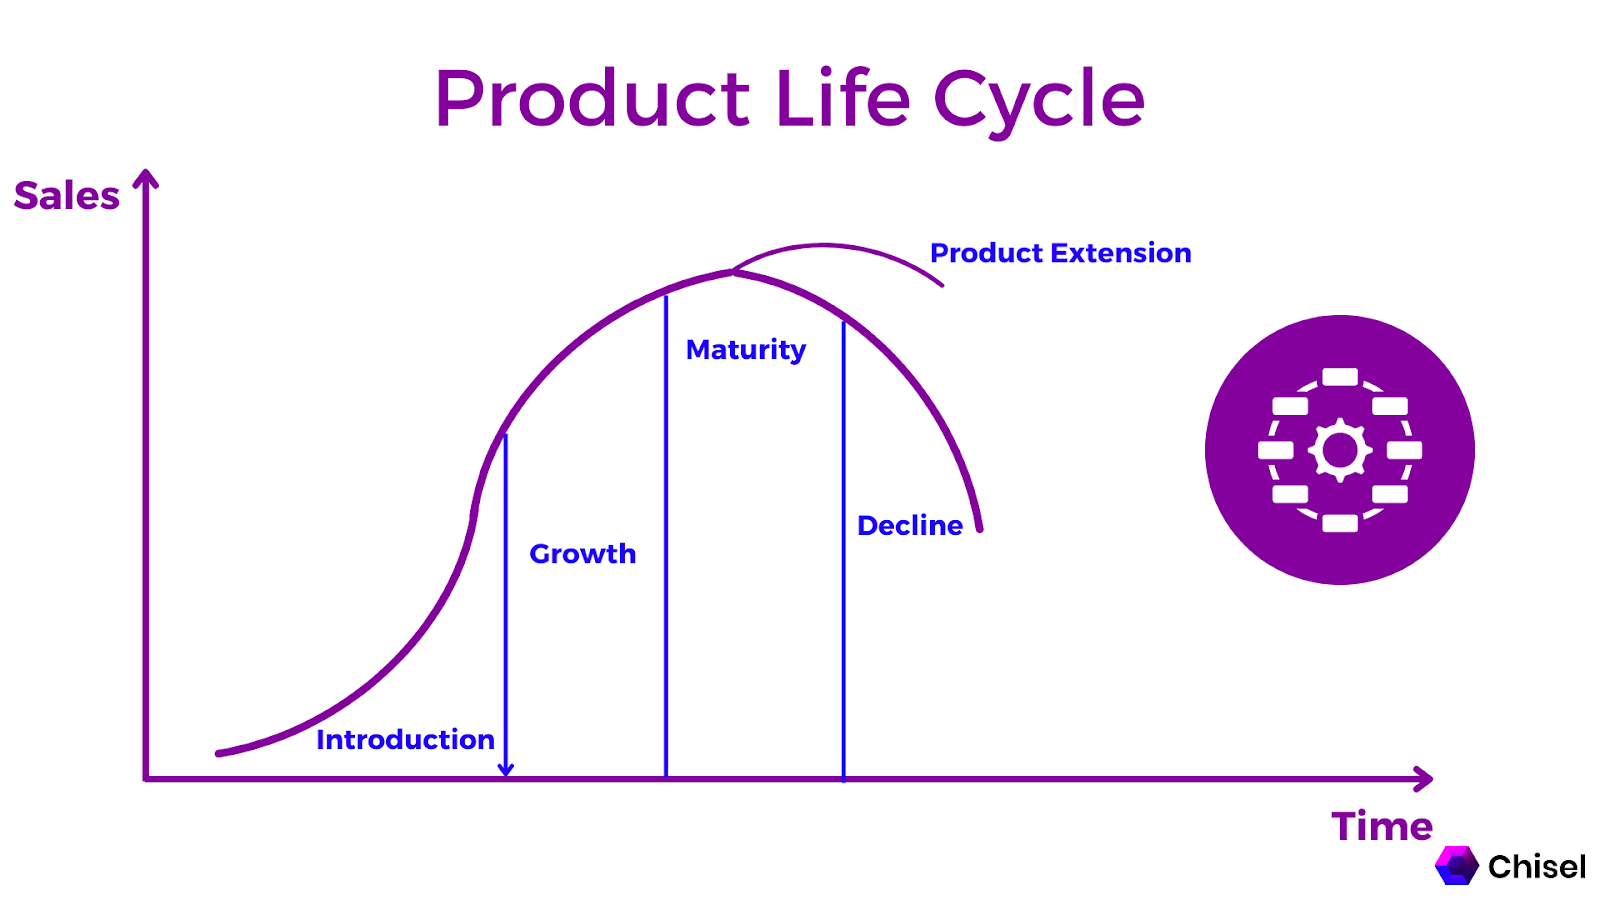 How does Product Life Cycle work?